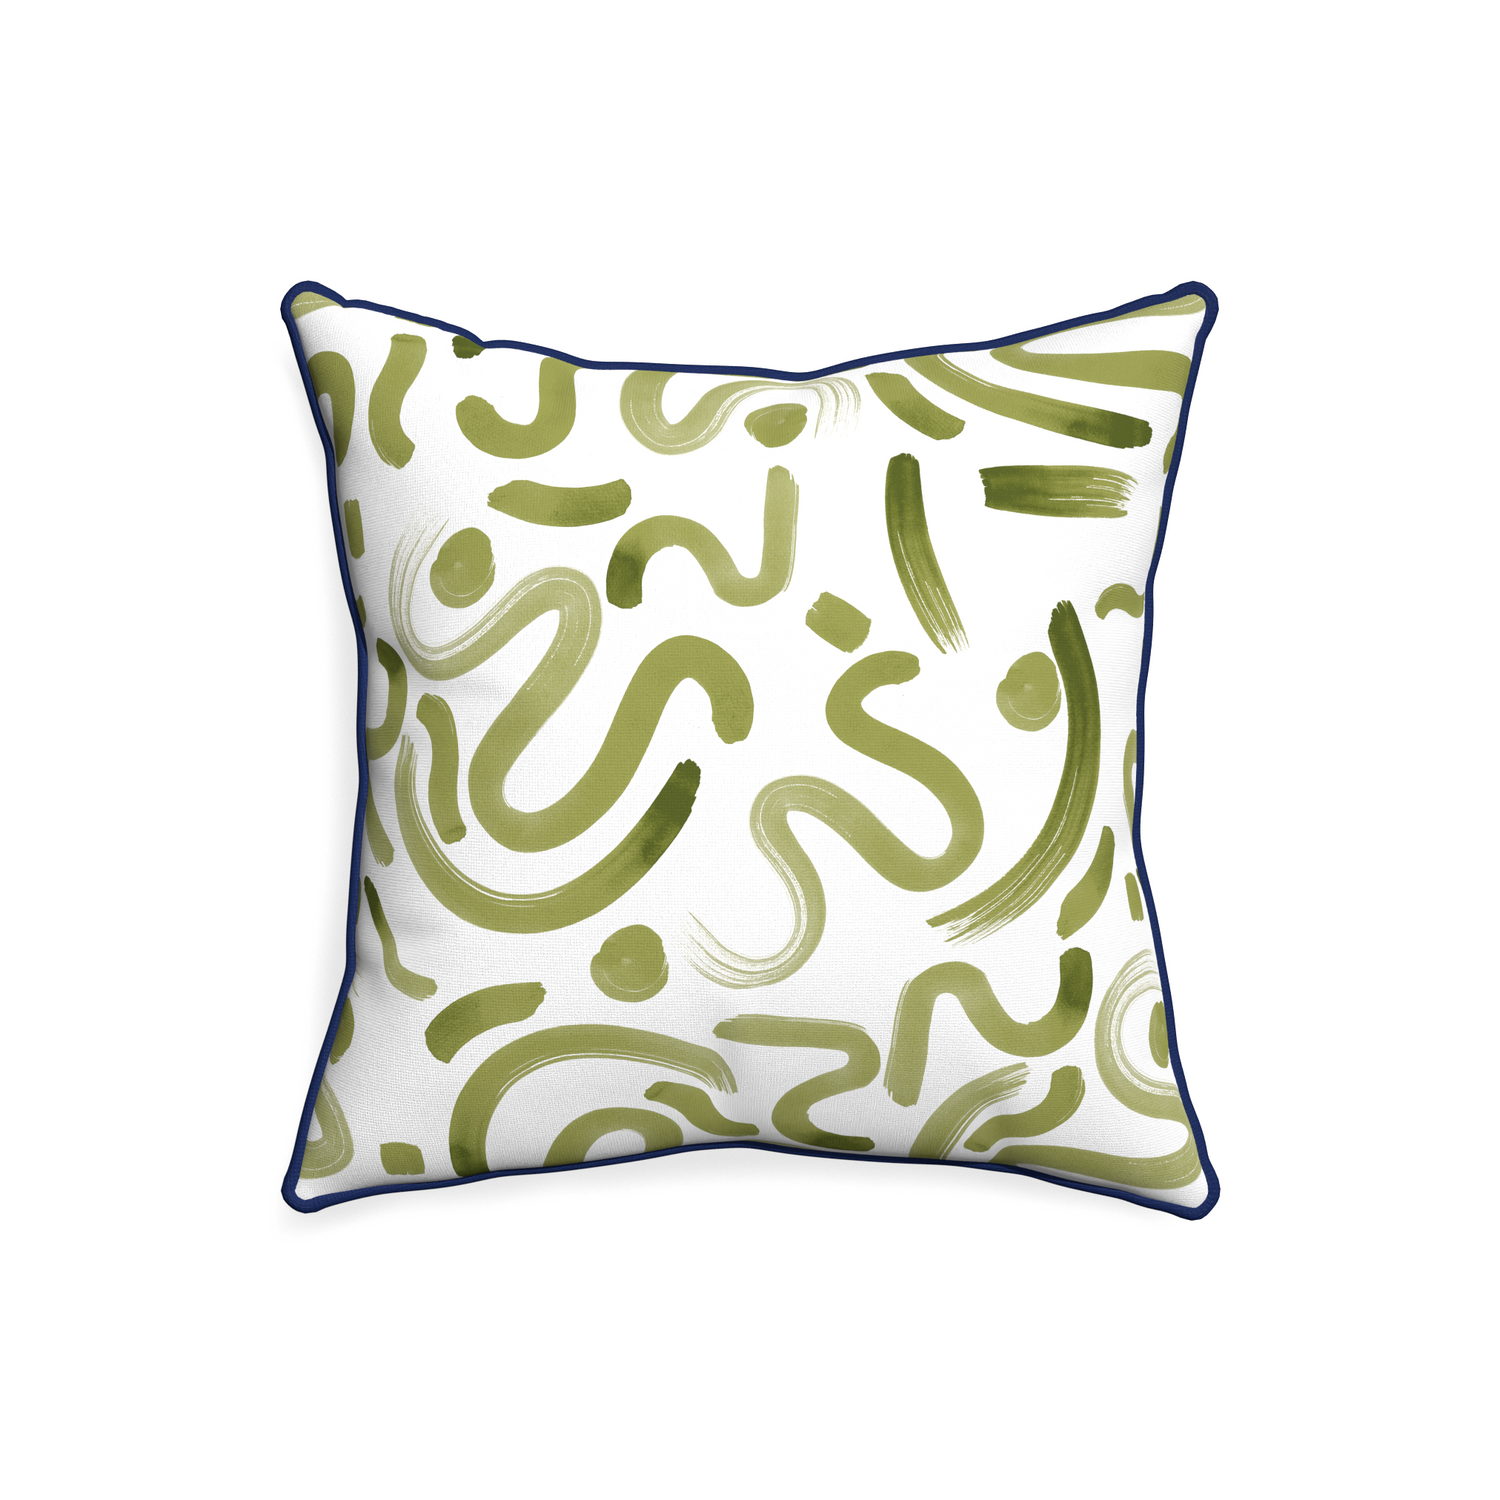 20-square hockney moss custom moss greenpillow with midnight piping on white background